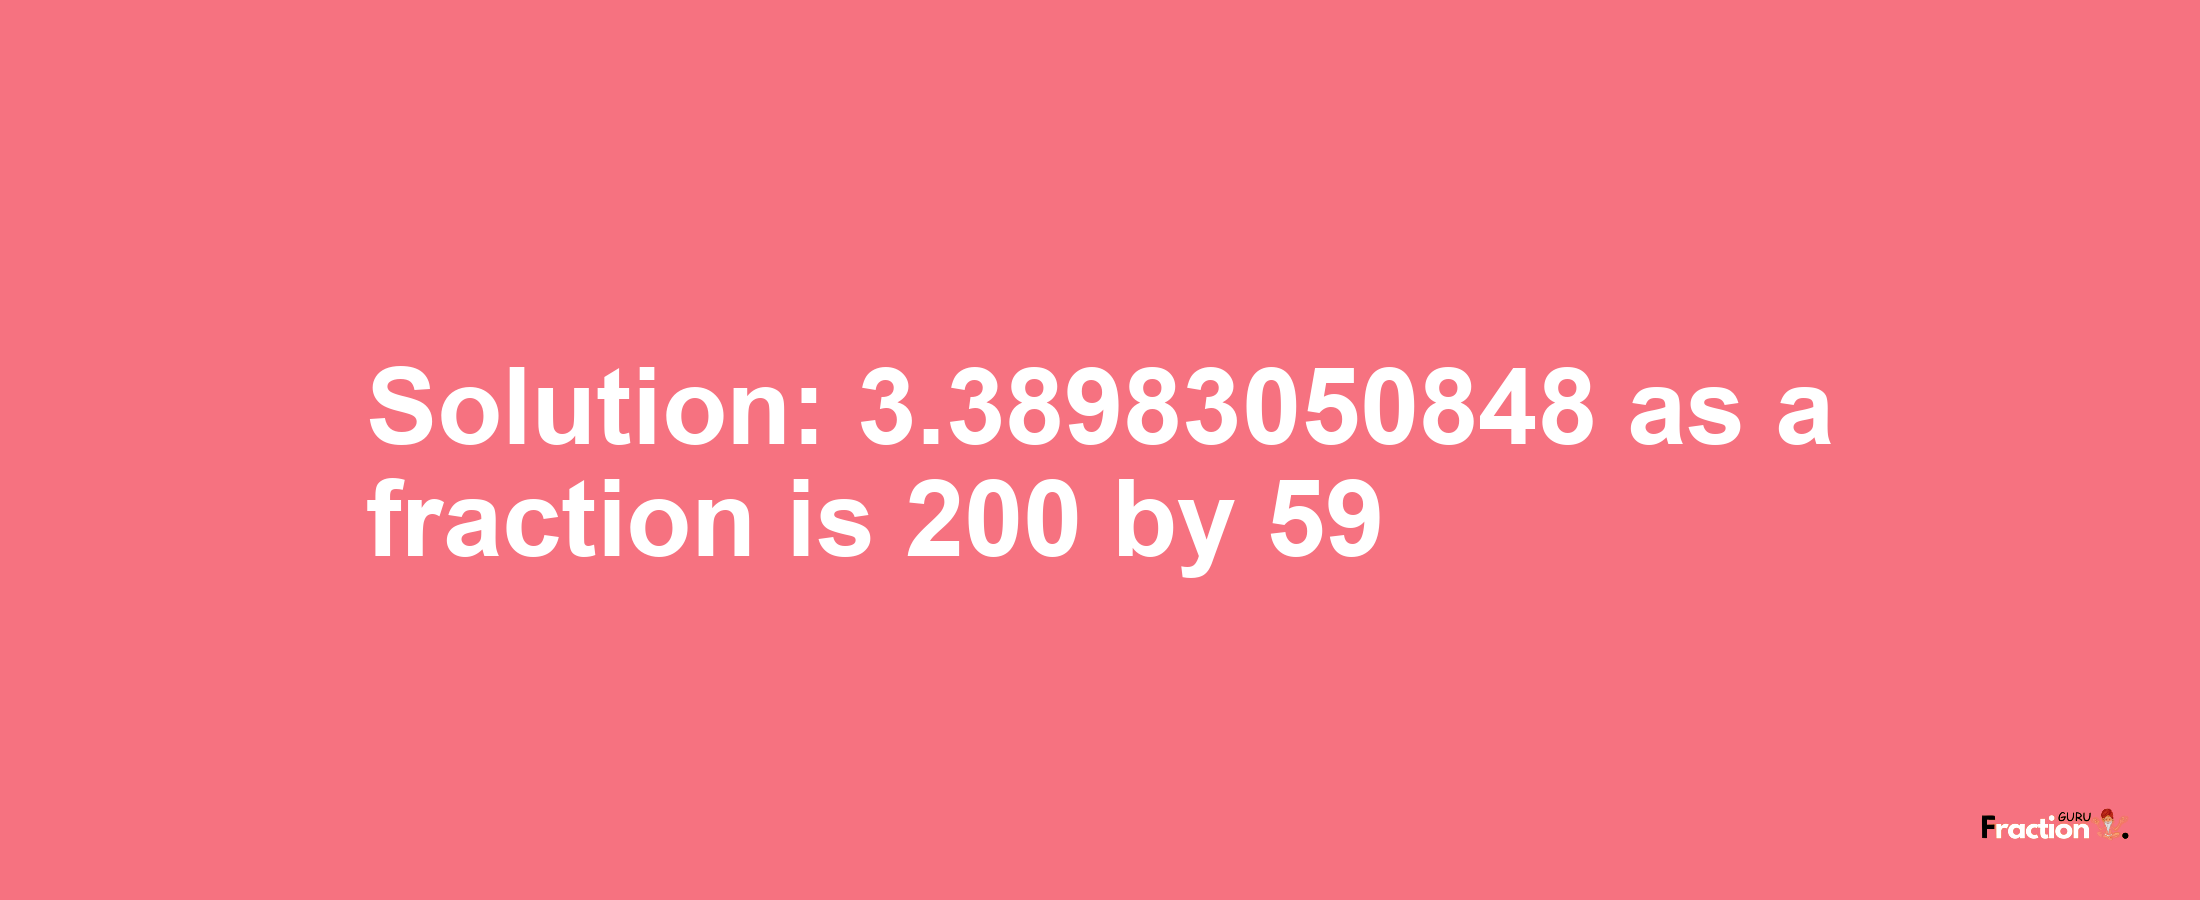 Solution:3.38983050848 as a fraction is 200/59